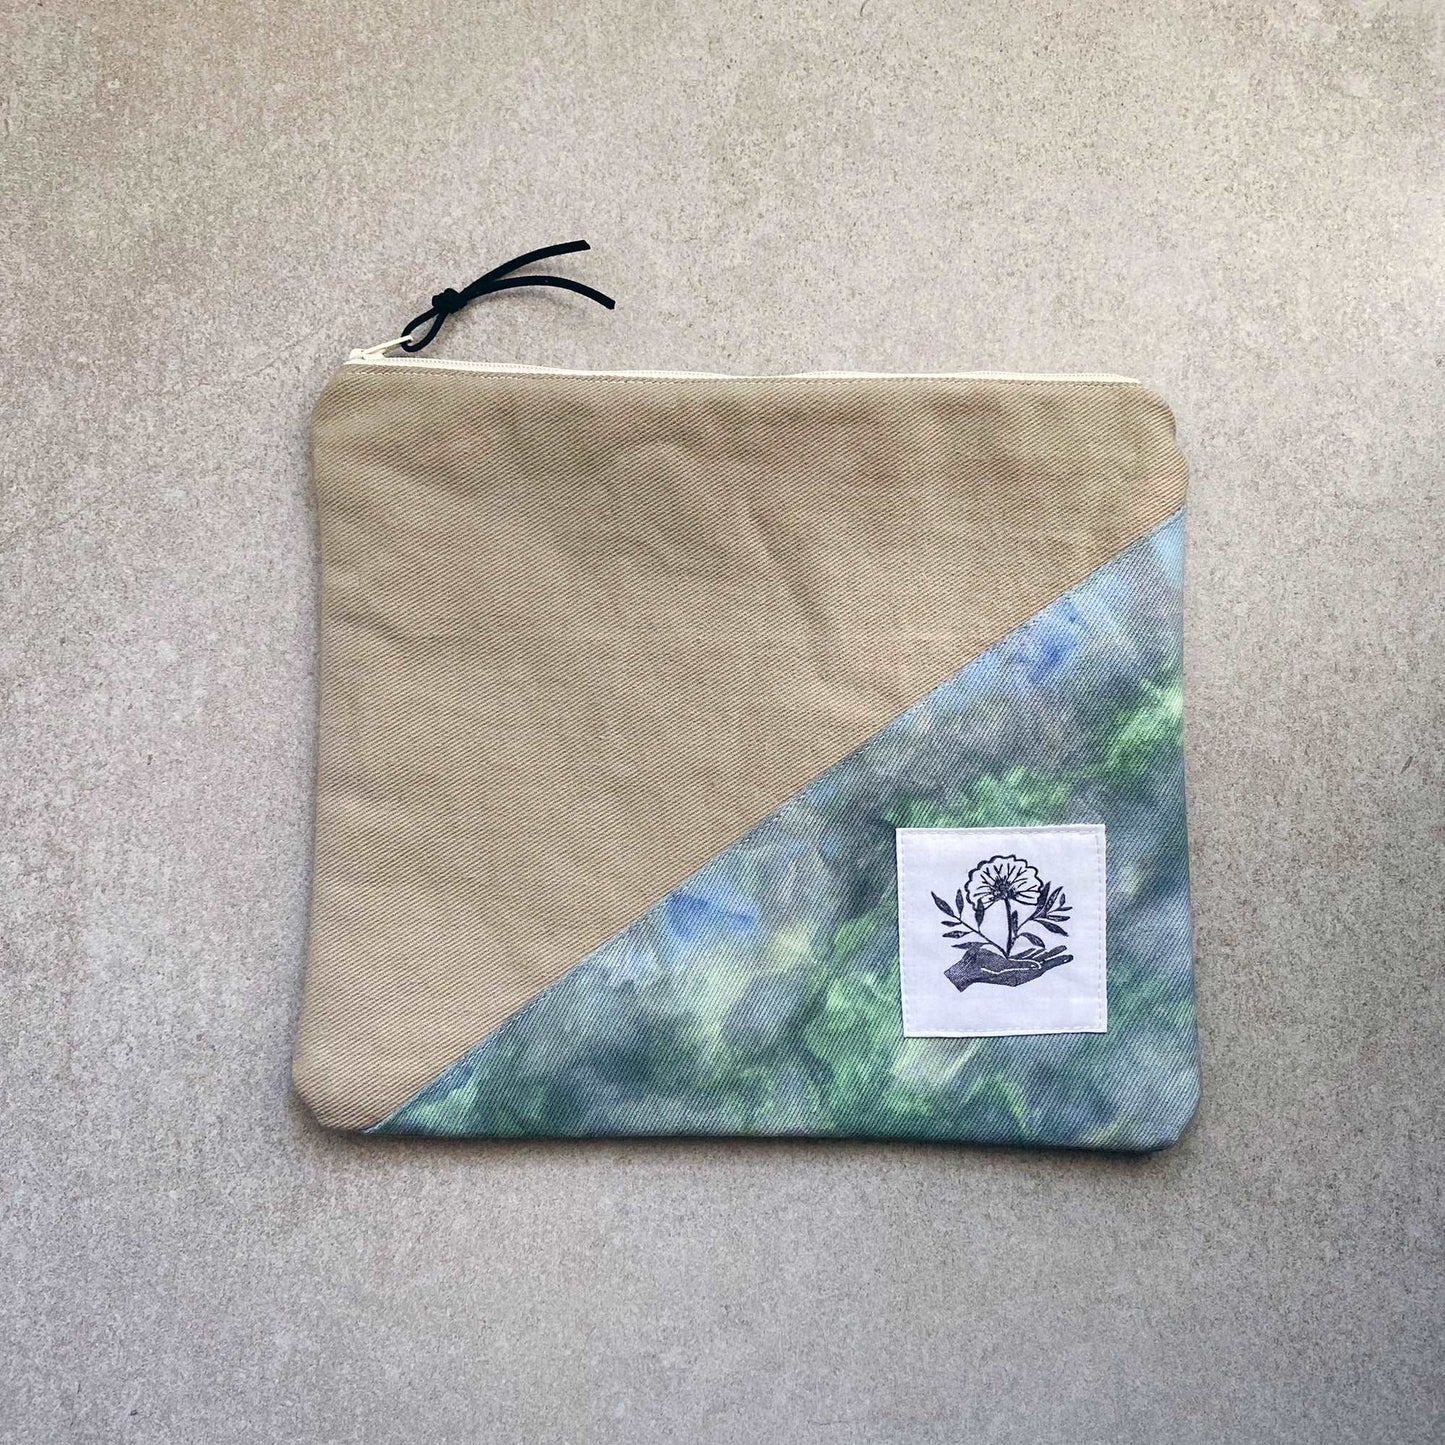 This is a photo of a large canvas zipper pouch featuring a green and blue ice dyed fabric panel. It is laying on a light gray background.